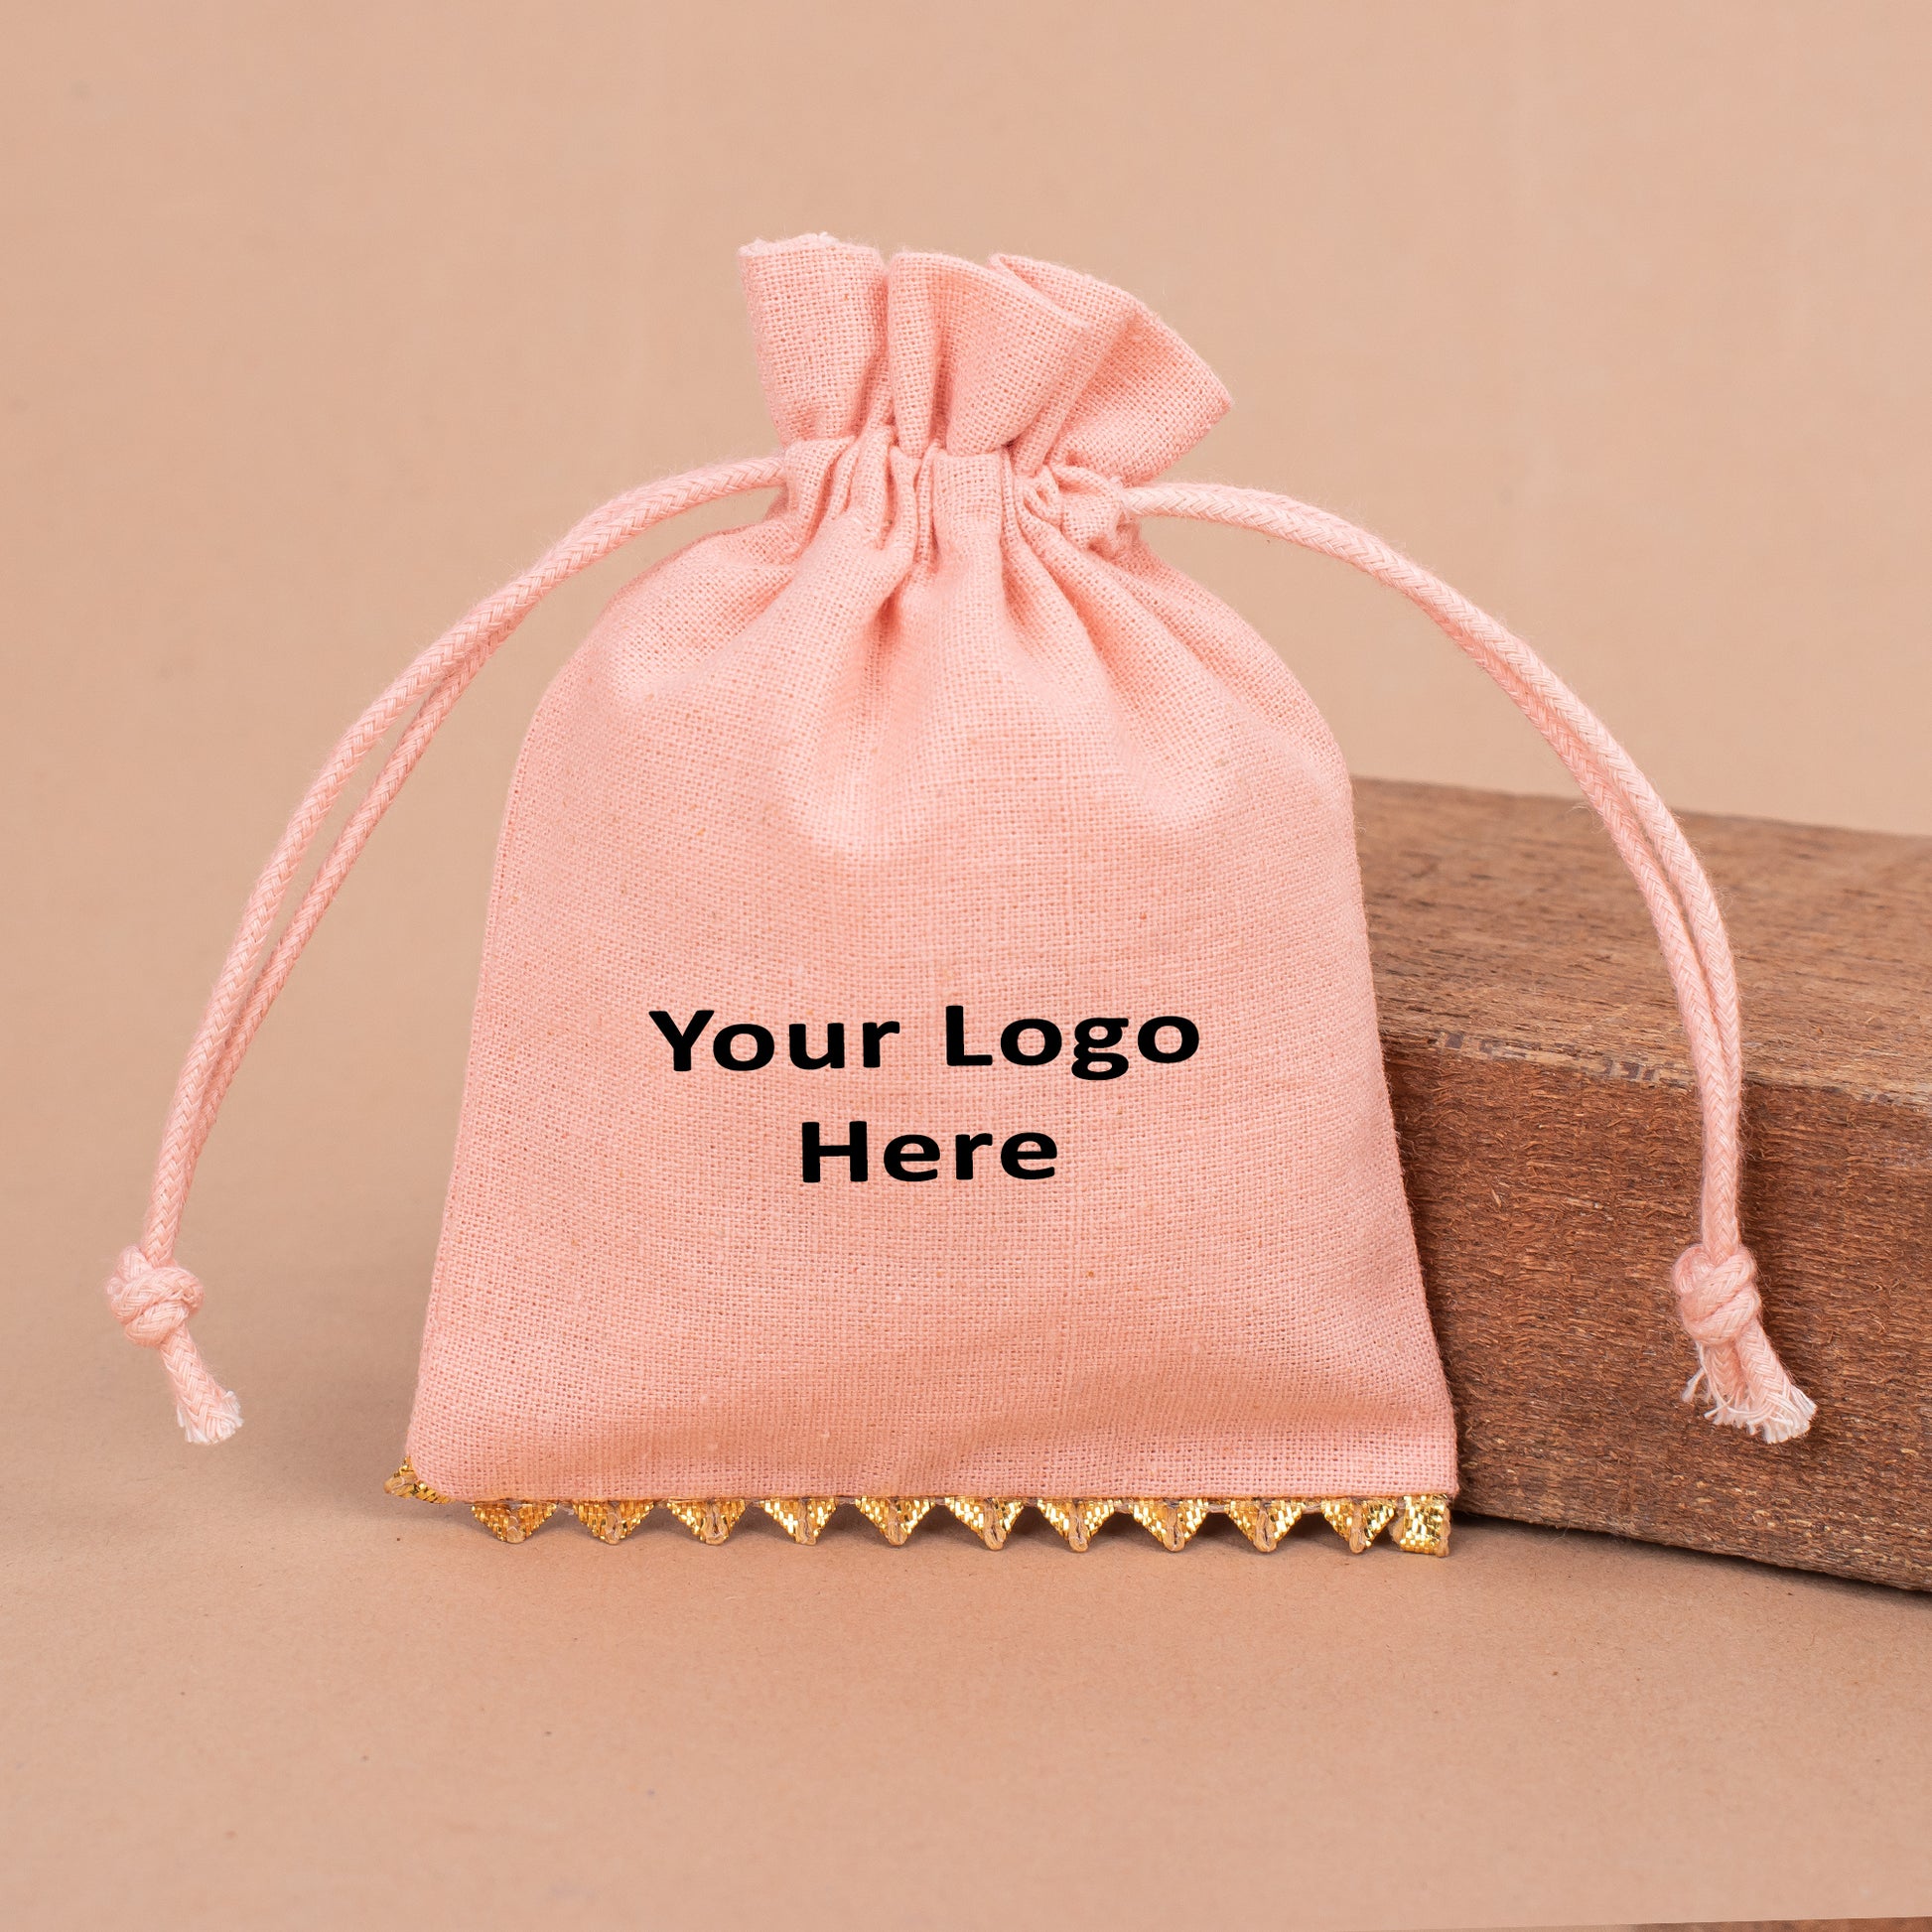  brand promotion bags